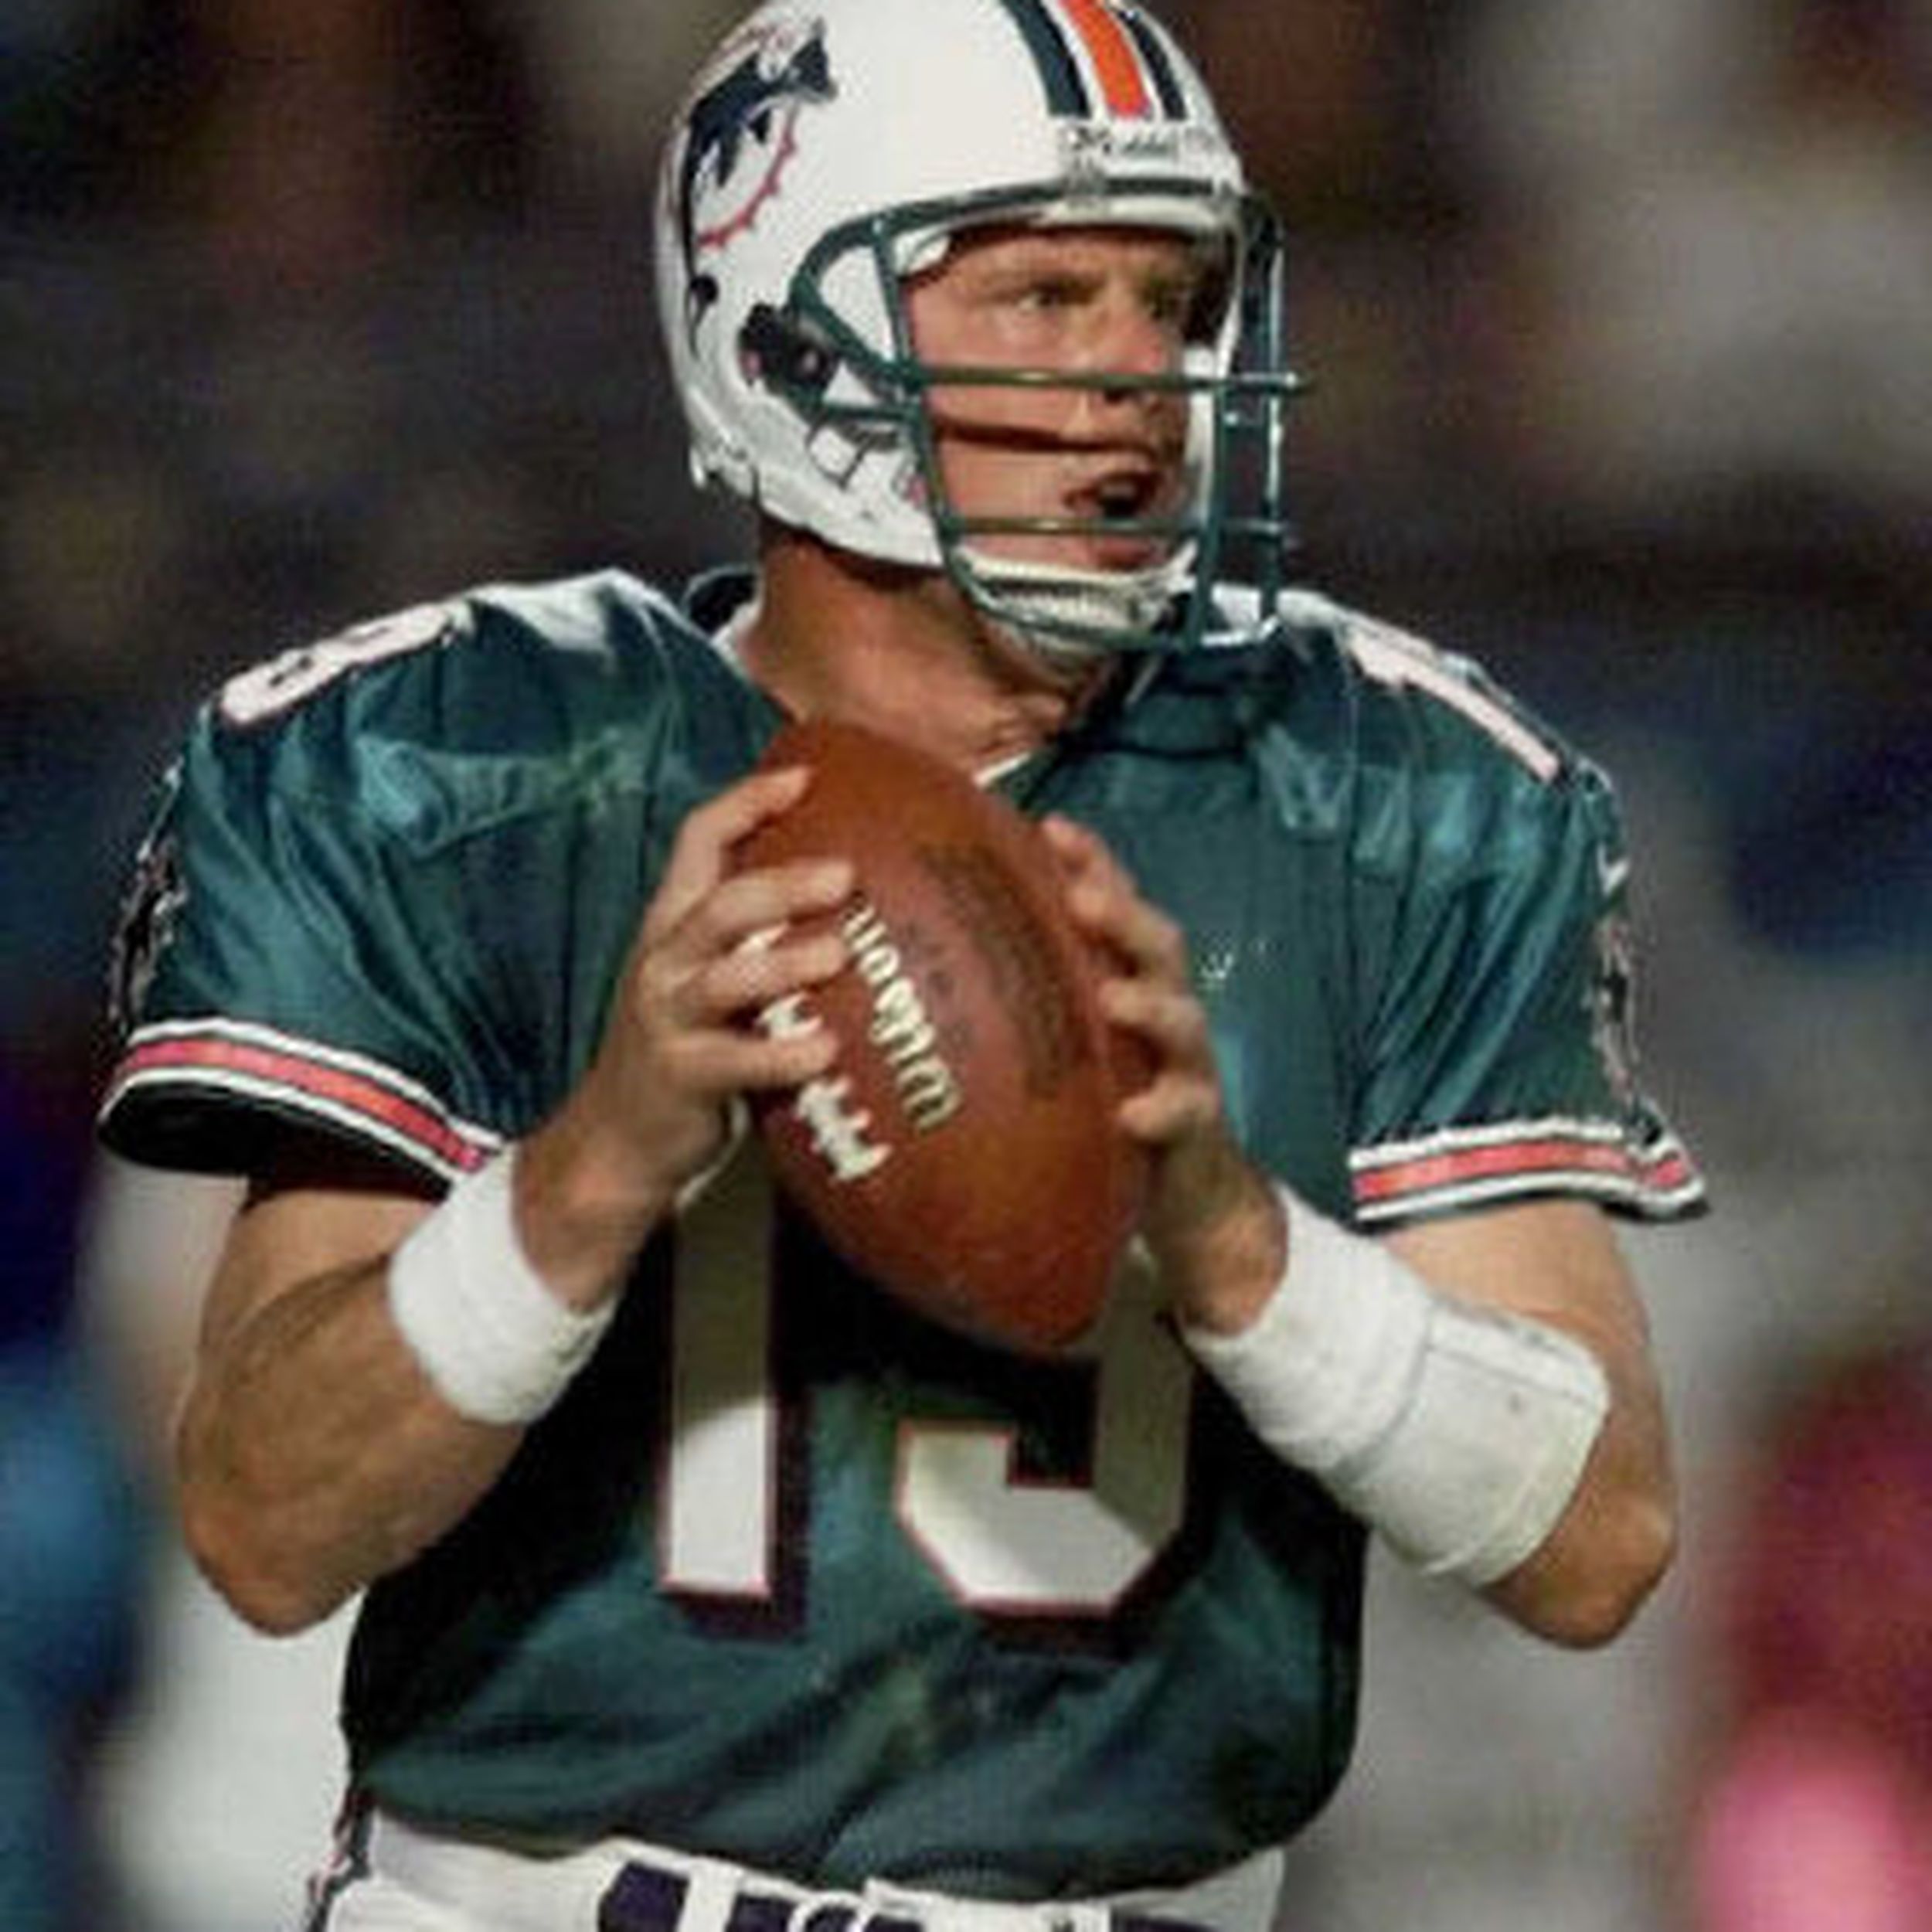 Quarterback Dan Marino of the Miami Dolphins in action against the